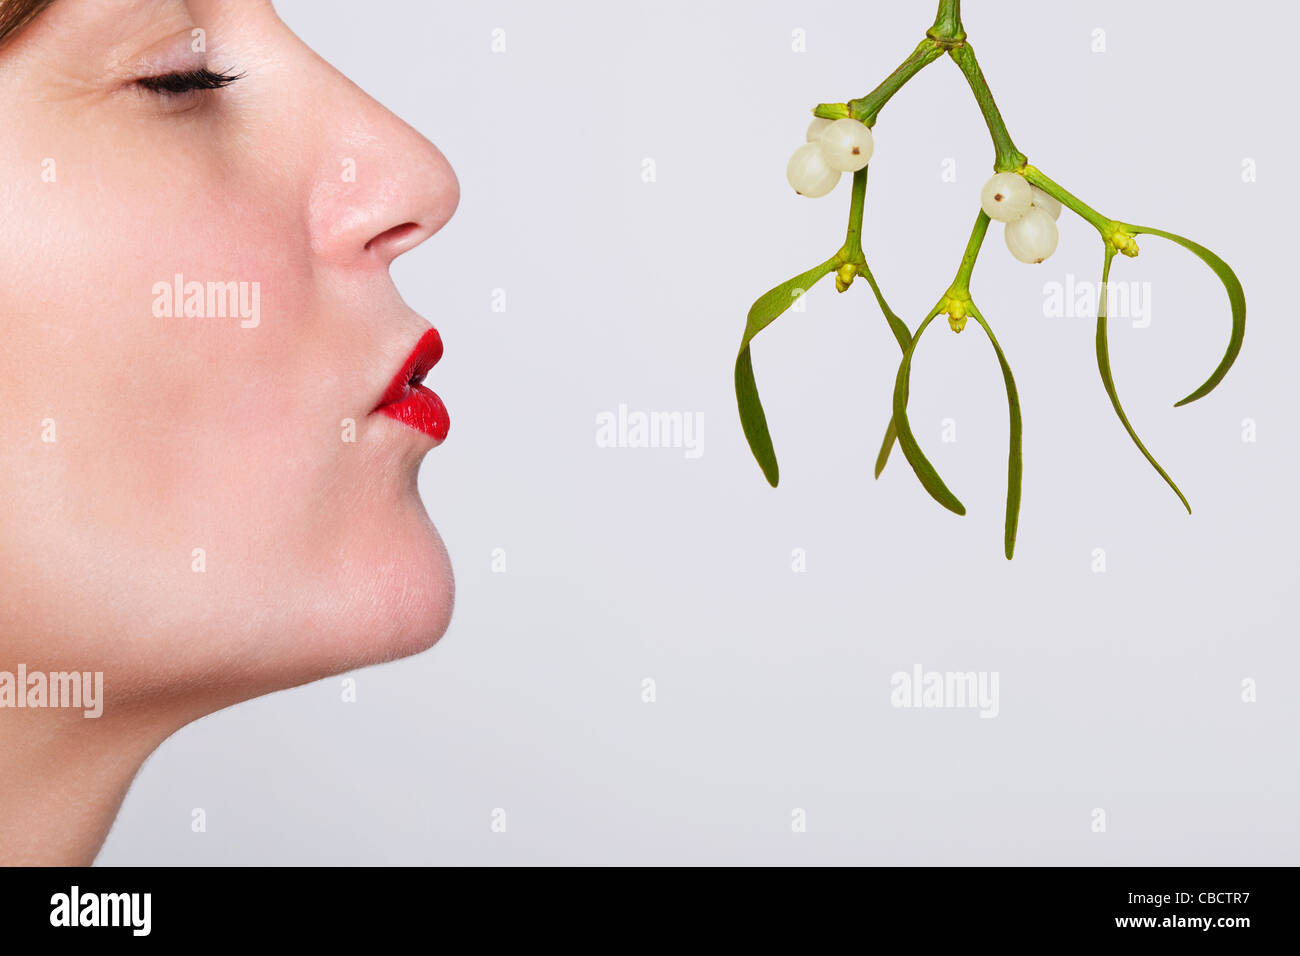 Photo of a woman with her eyes closed and red lipstick on waiting to be kissed under the mistletoe. Stock Photo